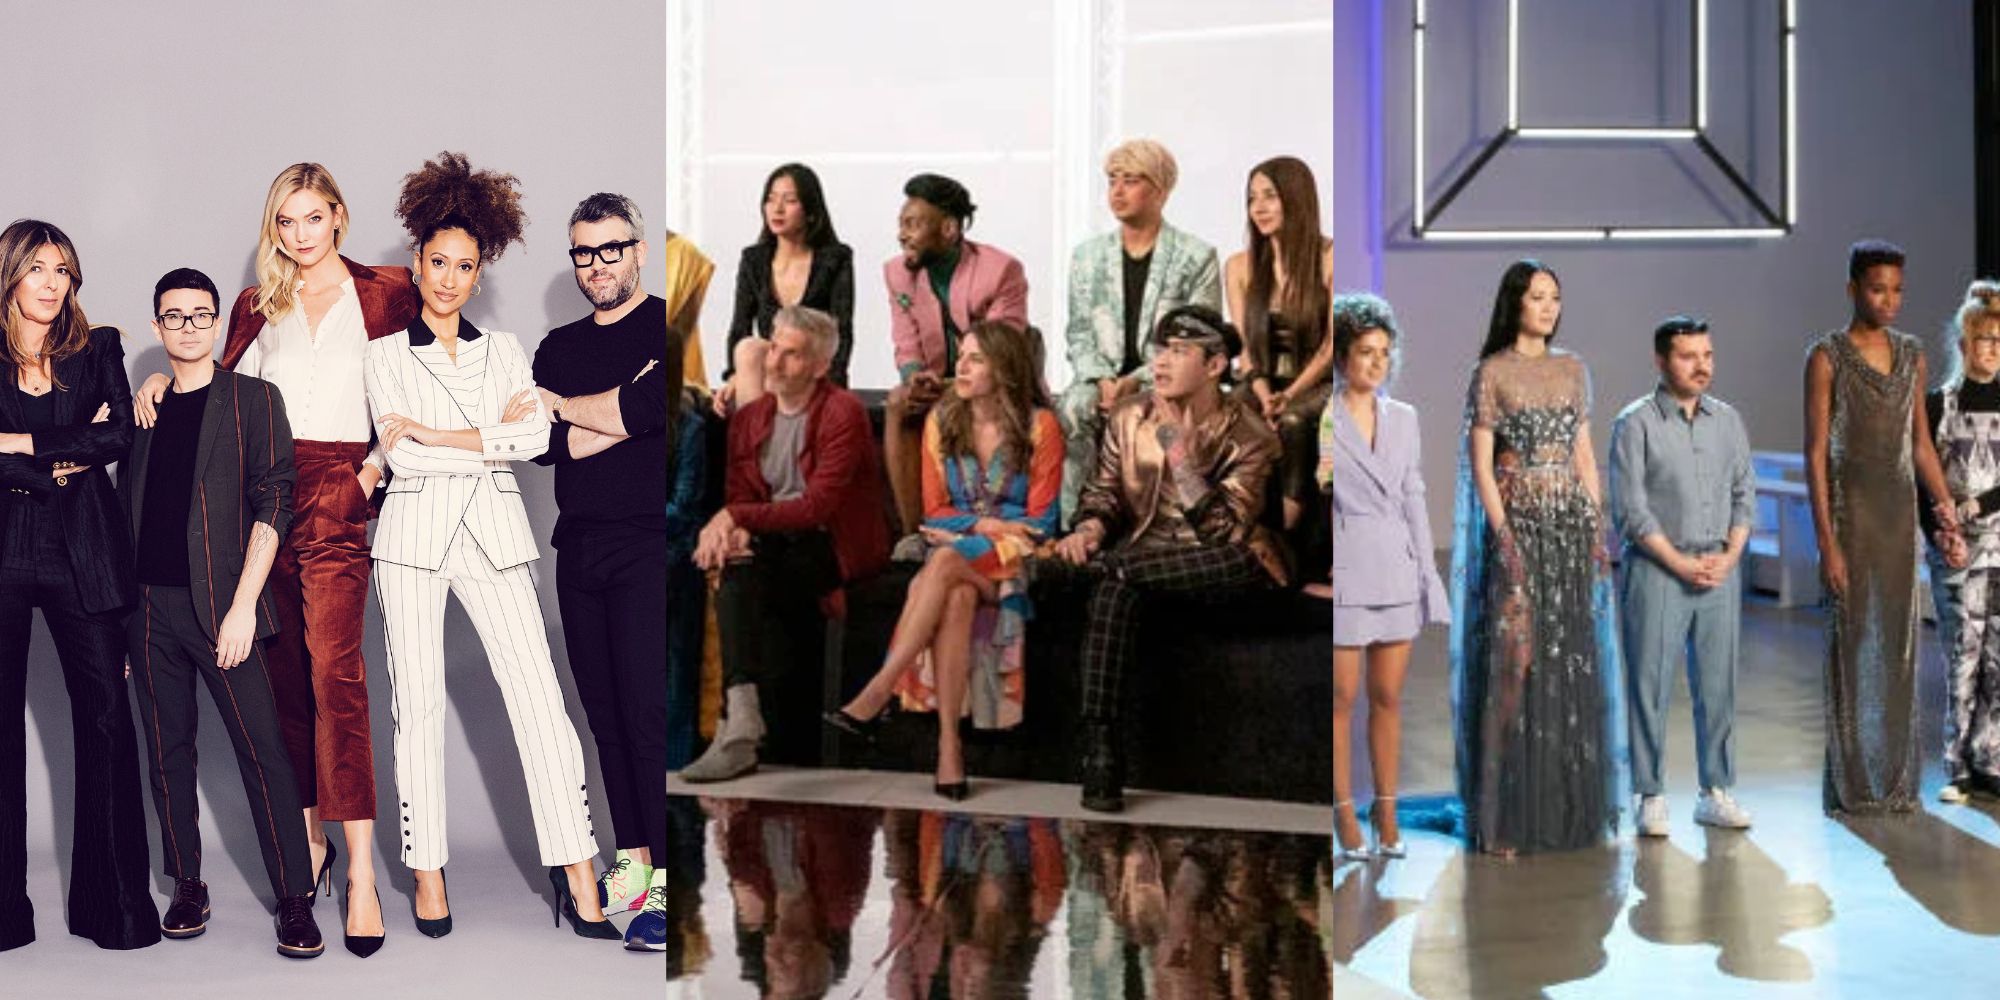 Project Runway: 10 Fakest Things About The Show, According To Cast And Crew